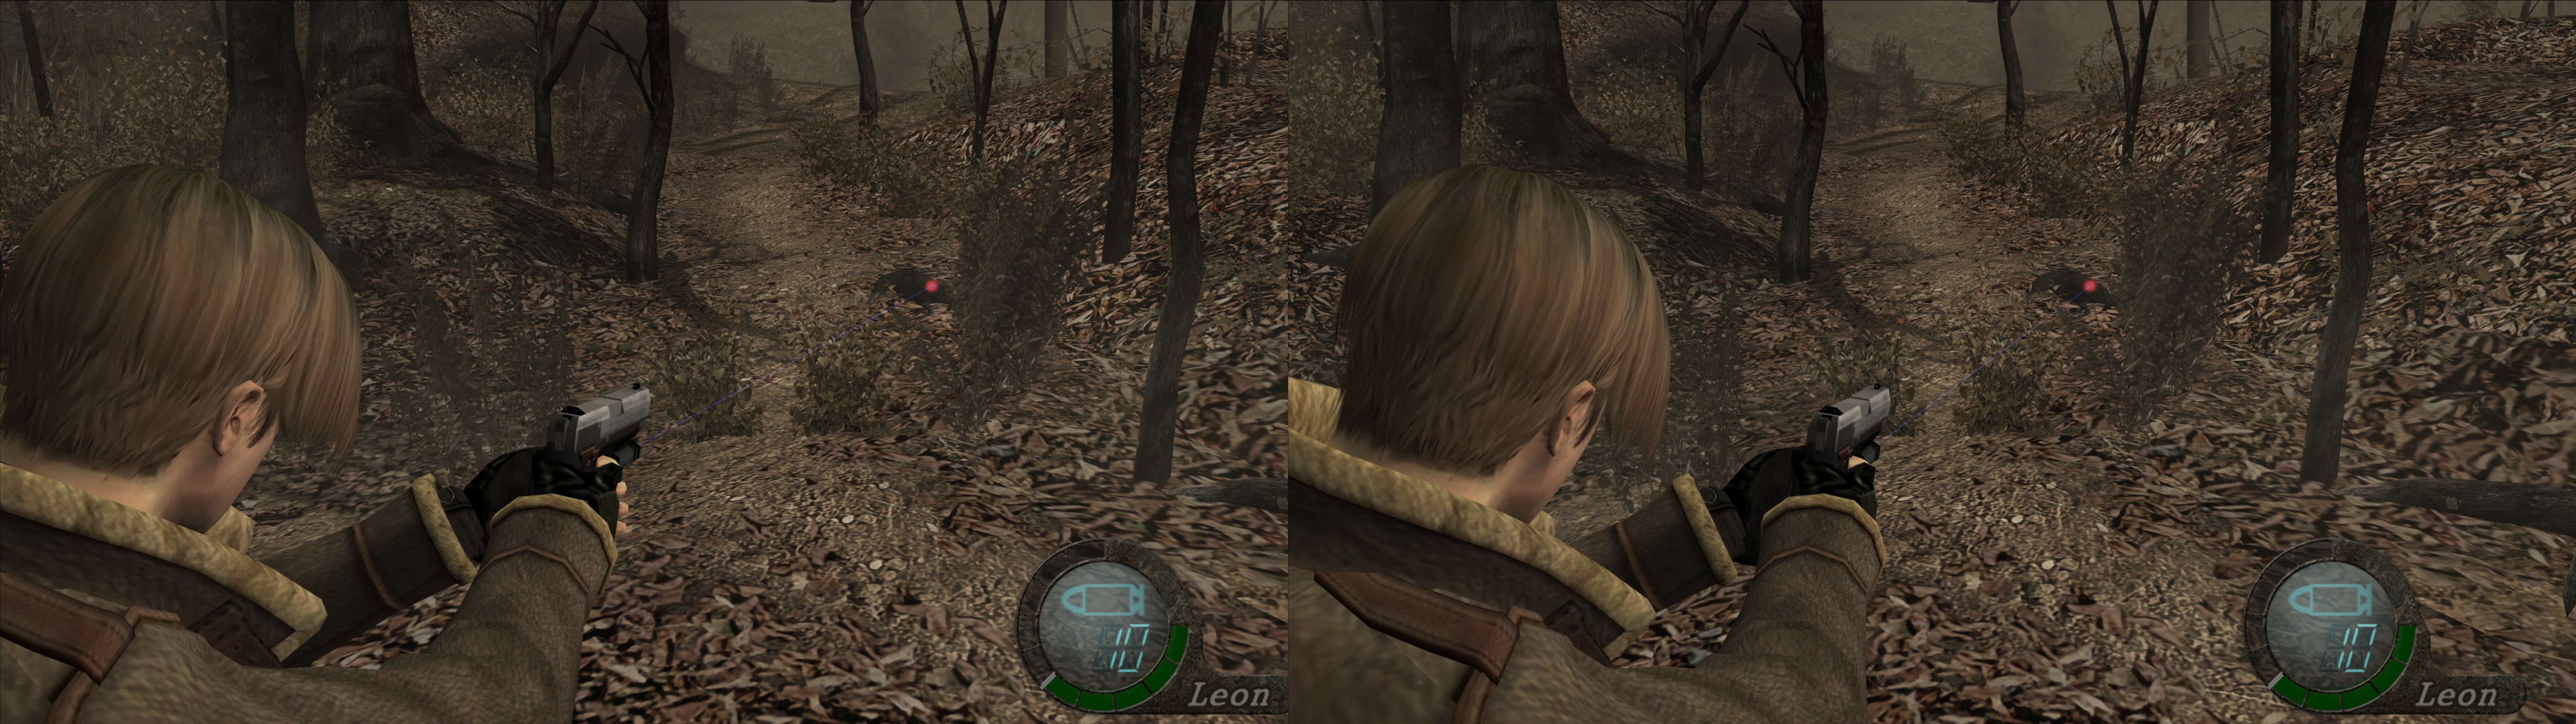 Resident Evil 4 HD project mod now available to download